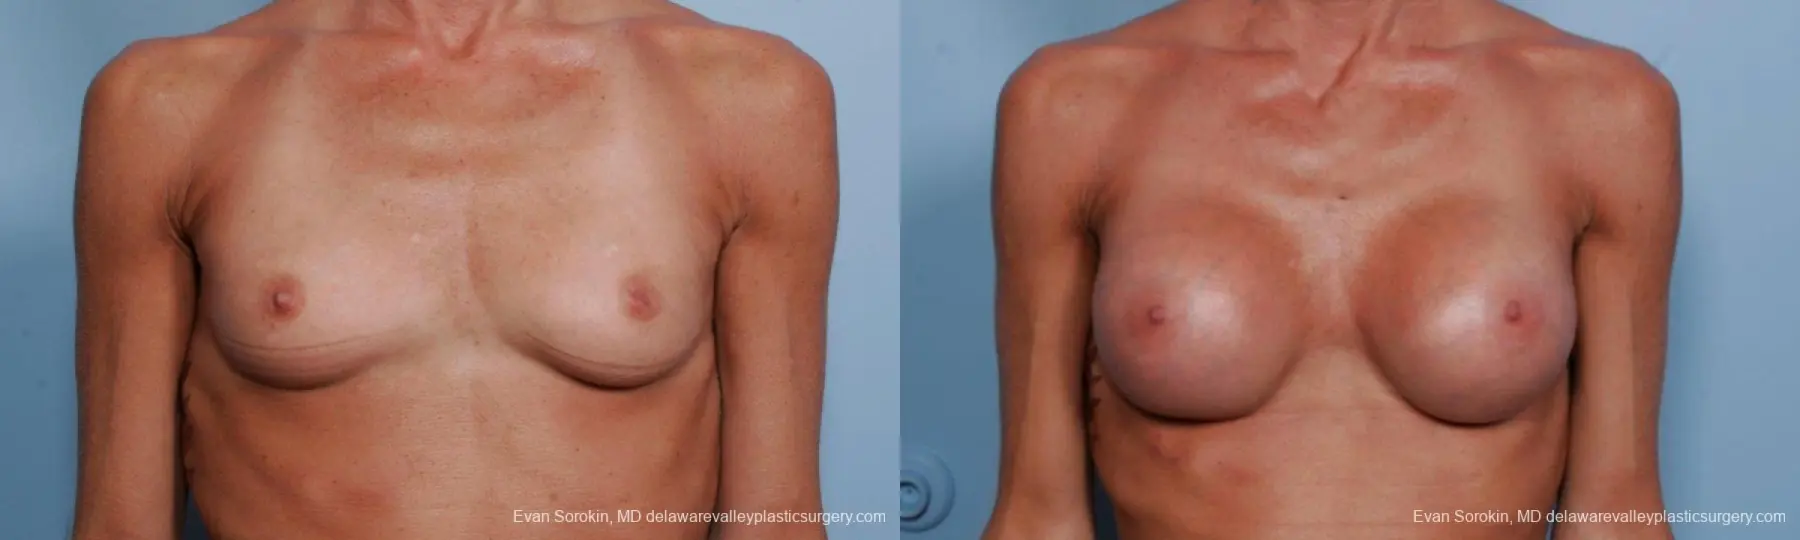 Philadelphia Breast Augmentation 8656 - Before and After 1